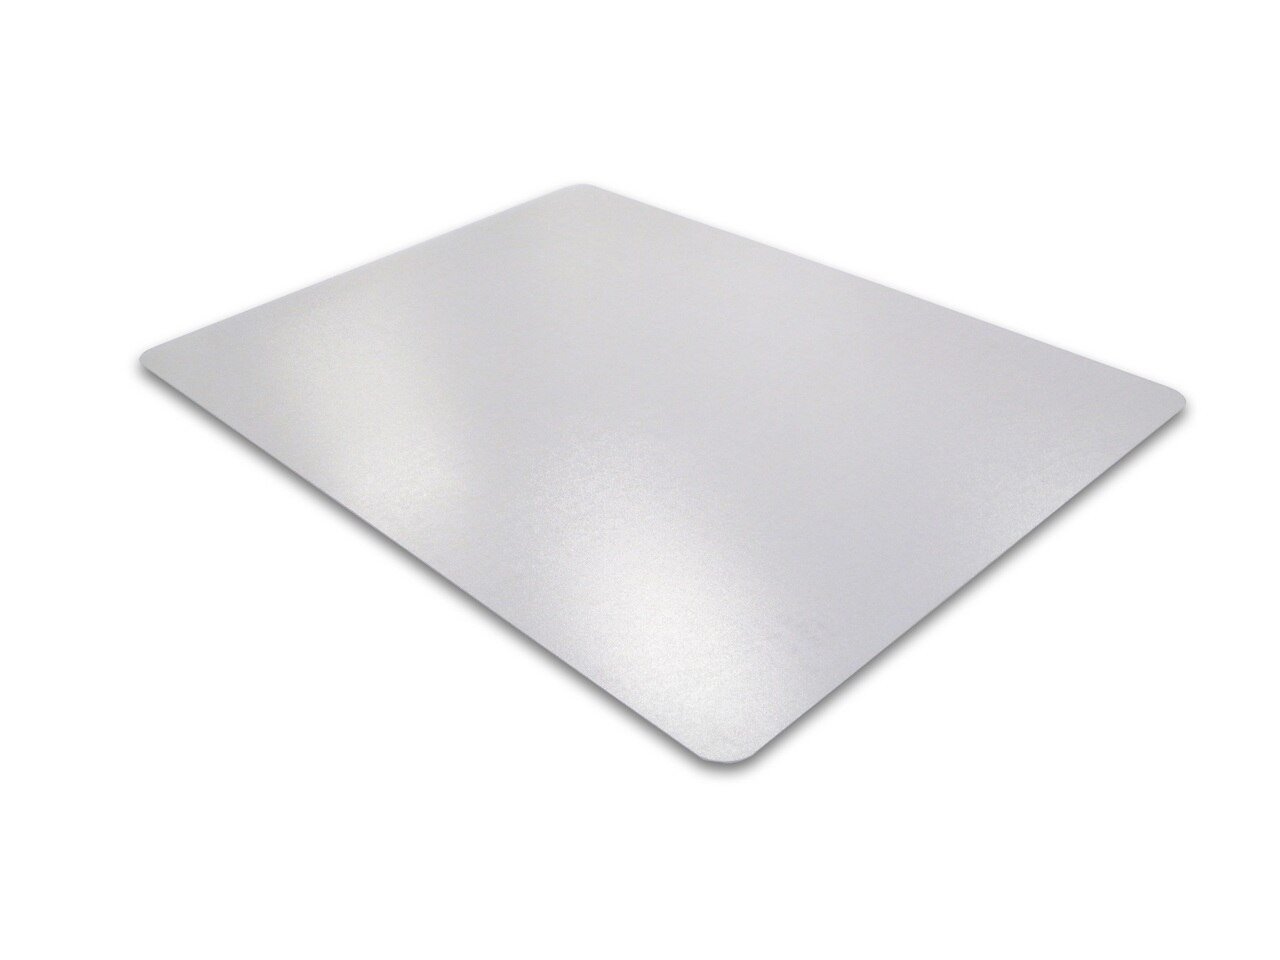 https://cdn11.bigcommerce.com/s-fjwps1jbkv/images/stencil/1280x1280/products/315/3069/floortex-anti-microbial-floor-protector-exercise-mat-for-home-gyms-exercise-and-fitness-or-for-hard-floors-or-clear-pvc-or-rectangular-or-multiple-sizes__38703.1688988279.jpg?c=2?imbypass=on